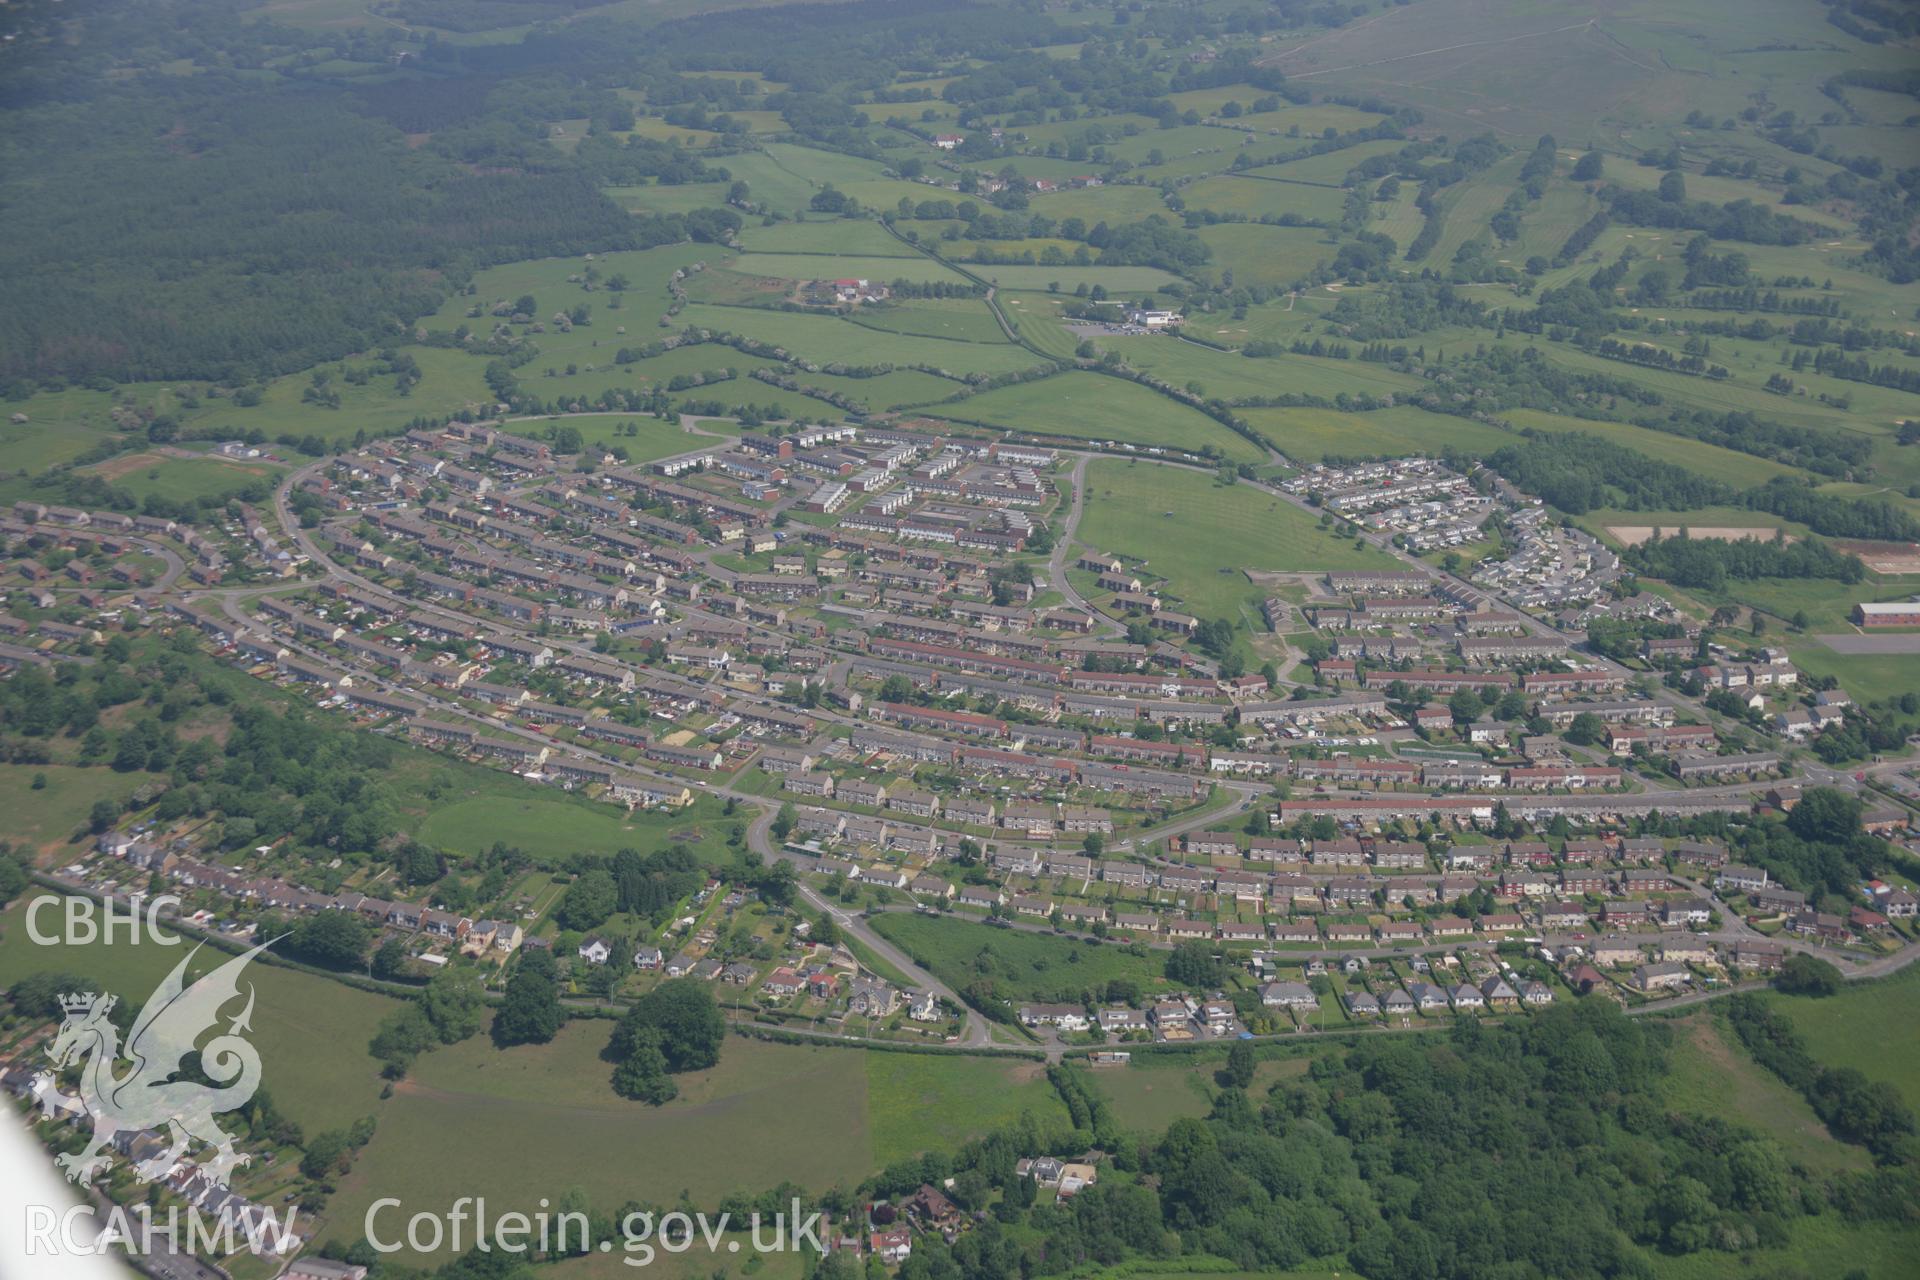 RCAHMW colour oblique aerial photograph of Pontypool showing housing at Trevethin from the south-west. Taken on 09 June 2006 by Toby Driver.